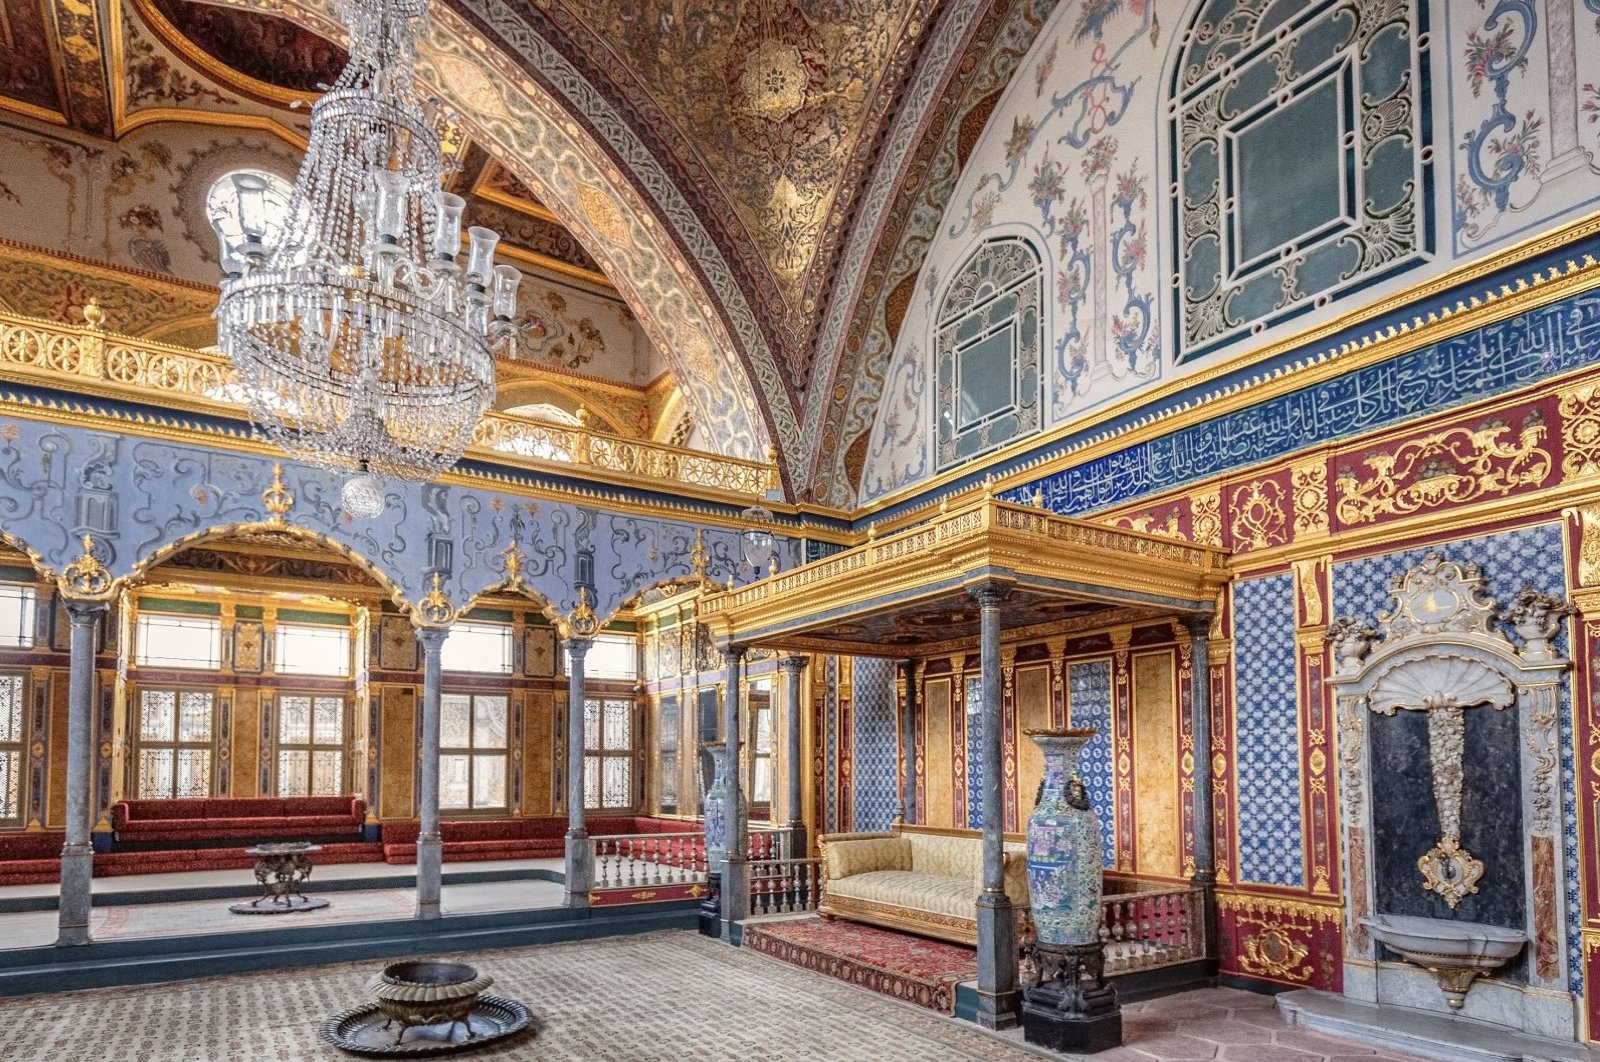 Topkapı Palace is one of the museums that will be open for visitors during the bayram holiday. (Ruslan Kaln / iStock Photo)